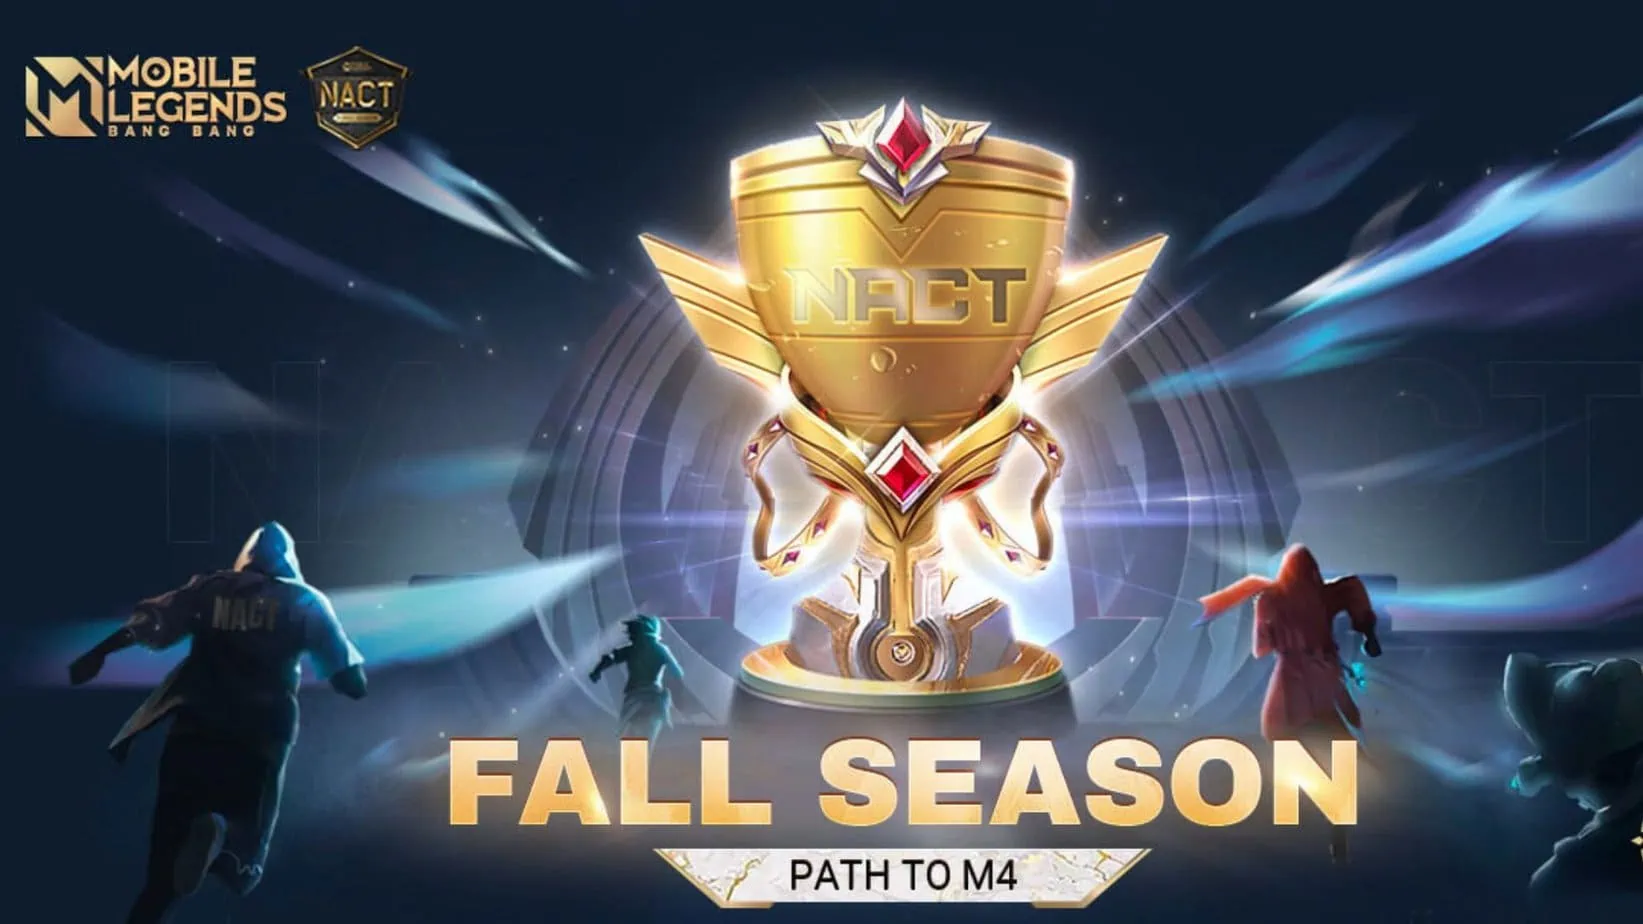 NACT Fall Season is your chance at M4 World Championship ONE Esports